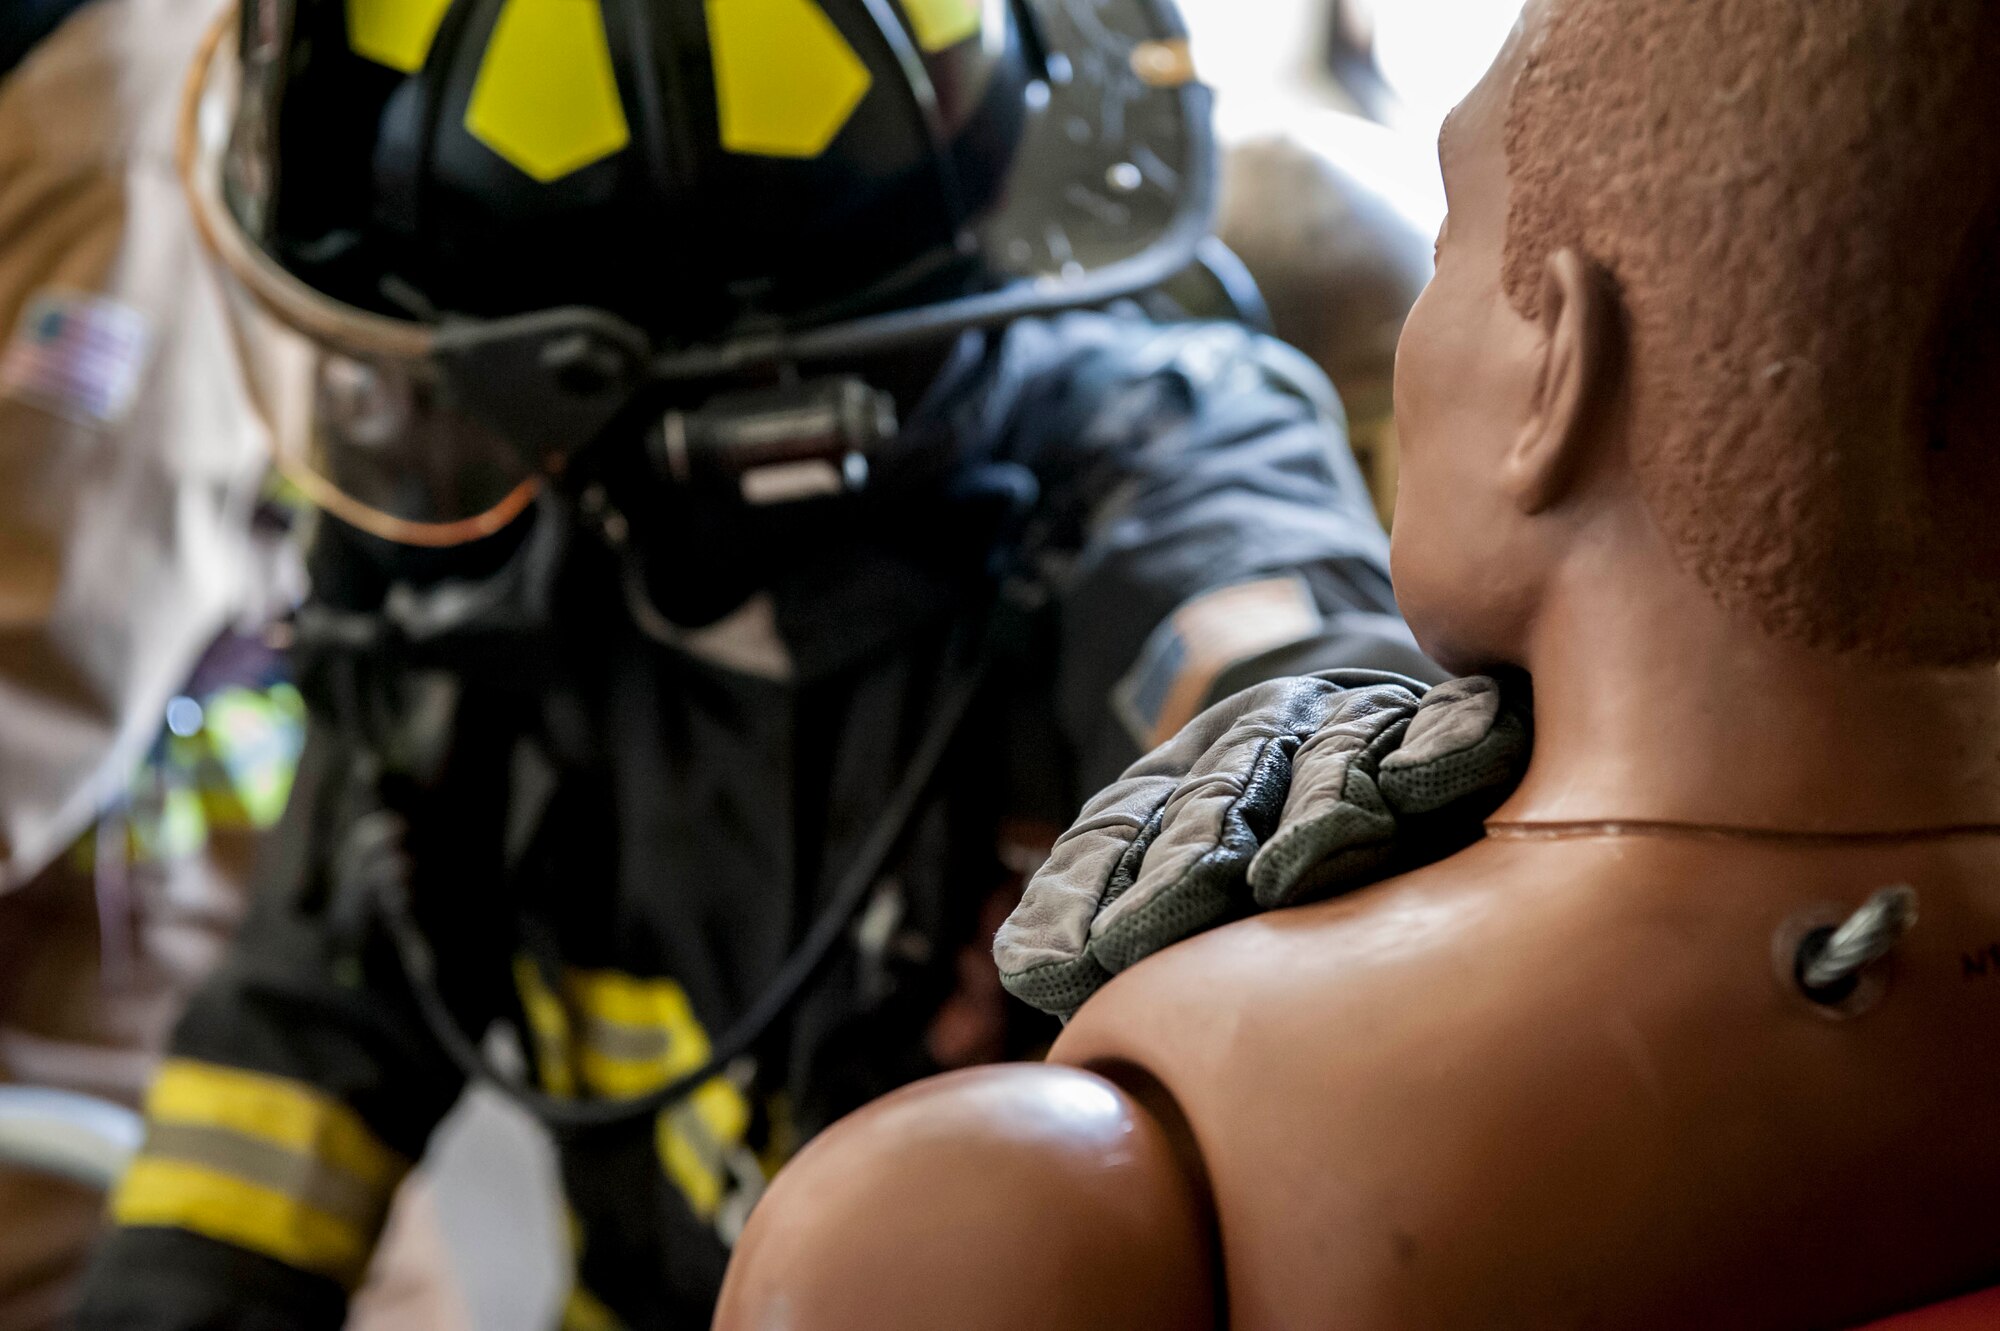 Staff Sgt. Demarcus Oliver, 18th Civil Engineer Squadron firefighter crew chief, supports a dummy during a tower evacuation drill Aug. 15, 2016, at Kadena Air Base, Japan. Training up to twice per week, firefighters ensure they remain constantly ready for possible emergencies, such as building evacuations and personnel recovery. (U.S. Air Force photo by Senior Airman Peter Reft)